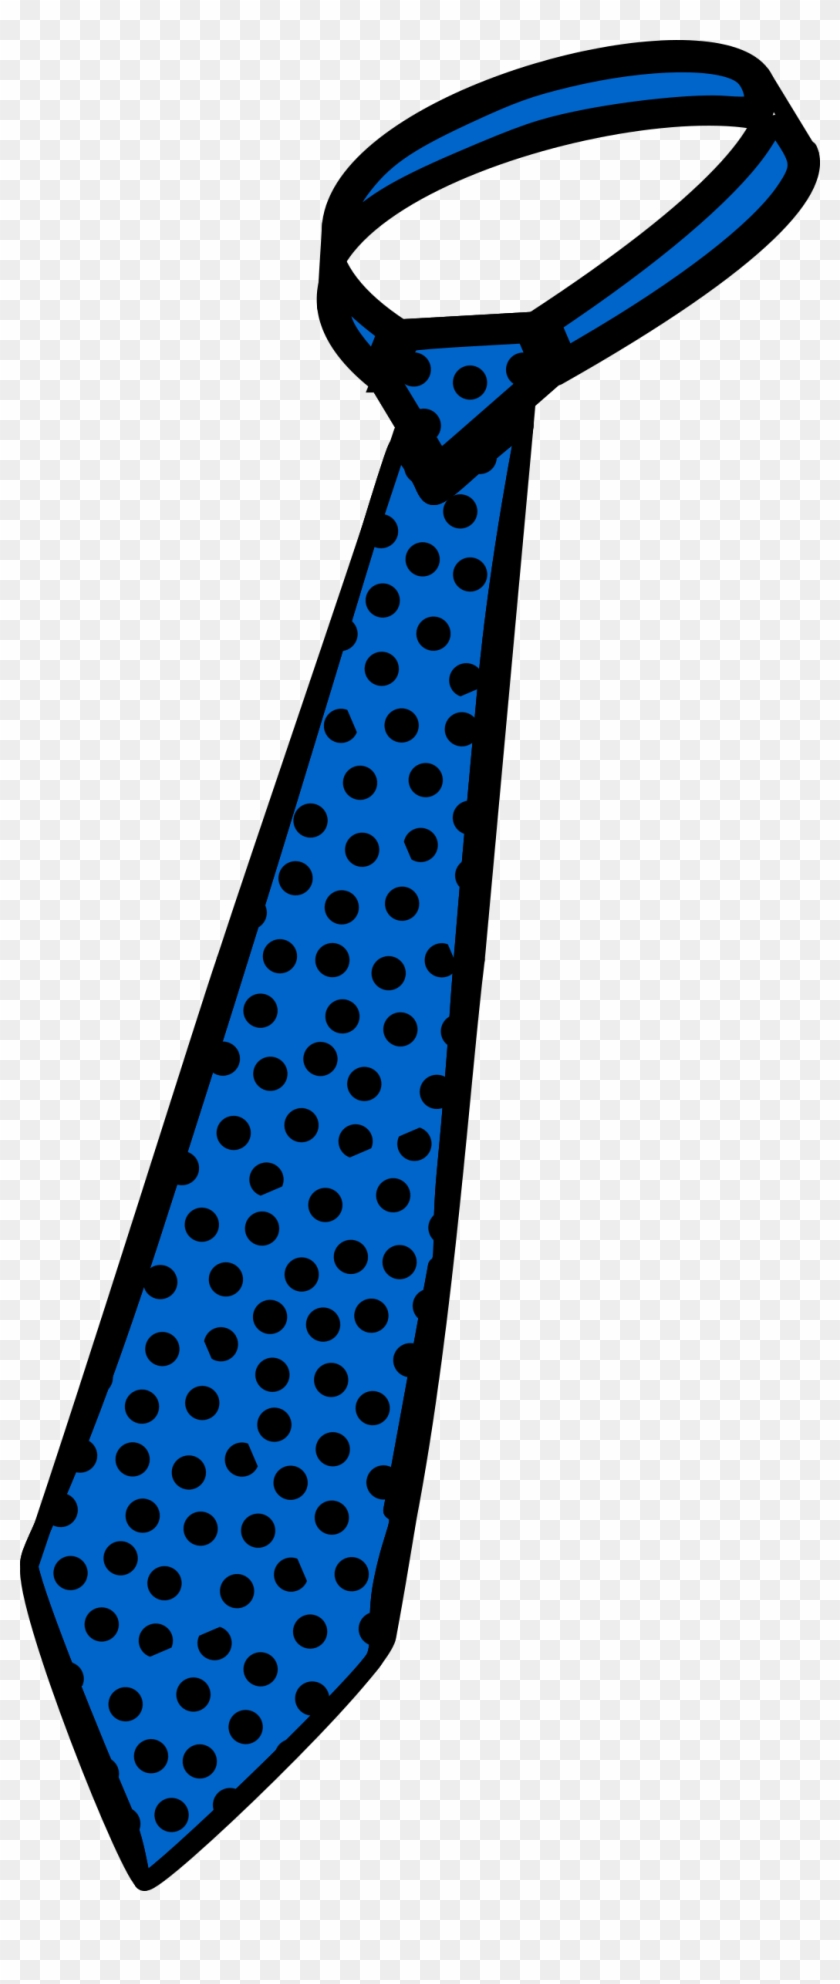 Polka-dot Tie - Clipart Of A Tie #538120